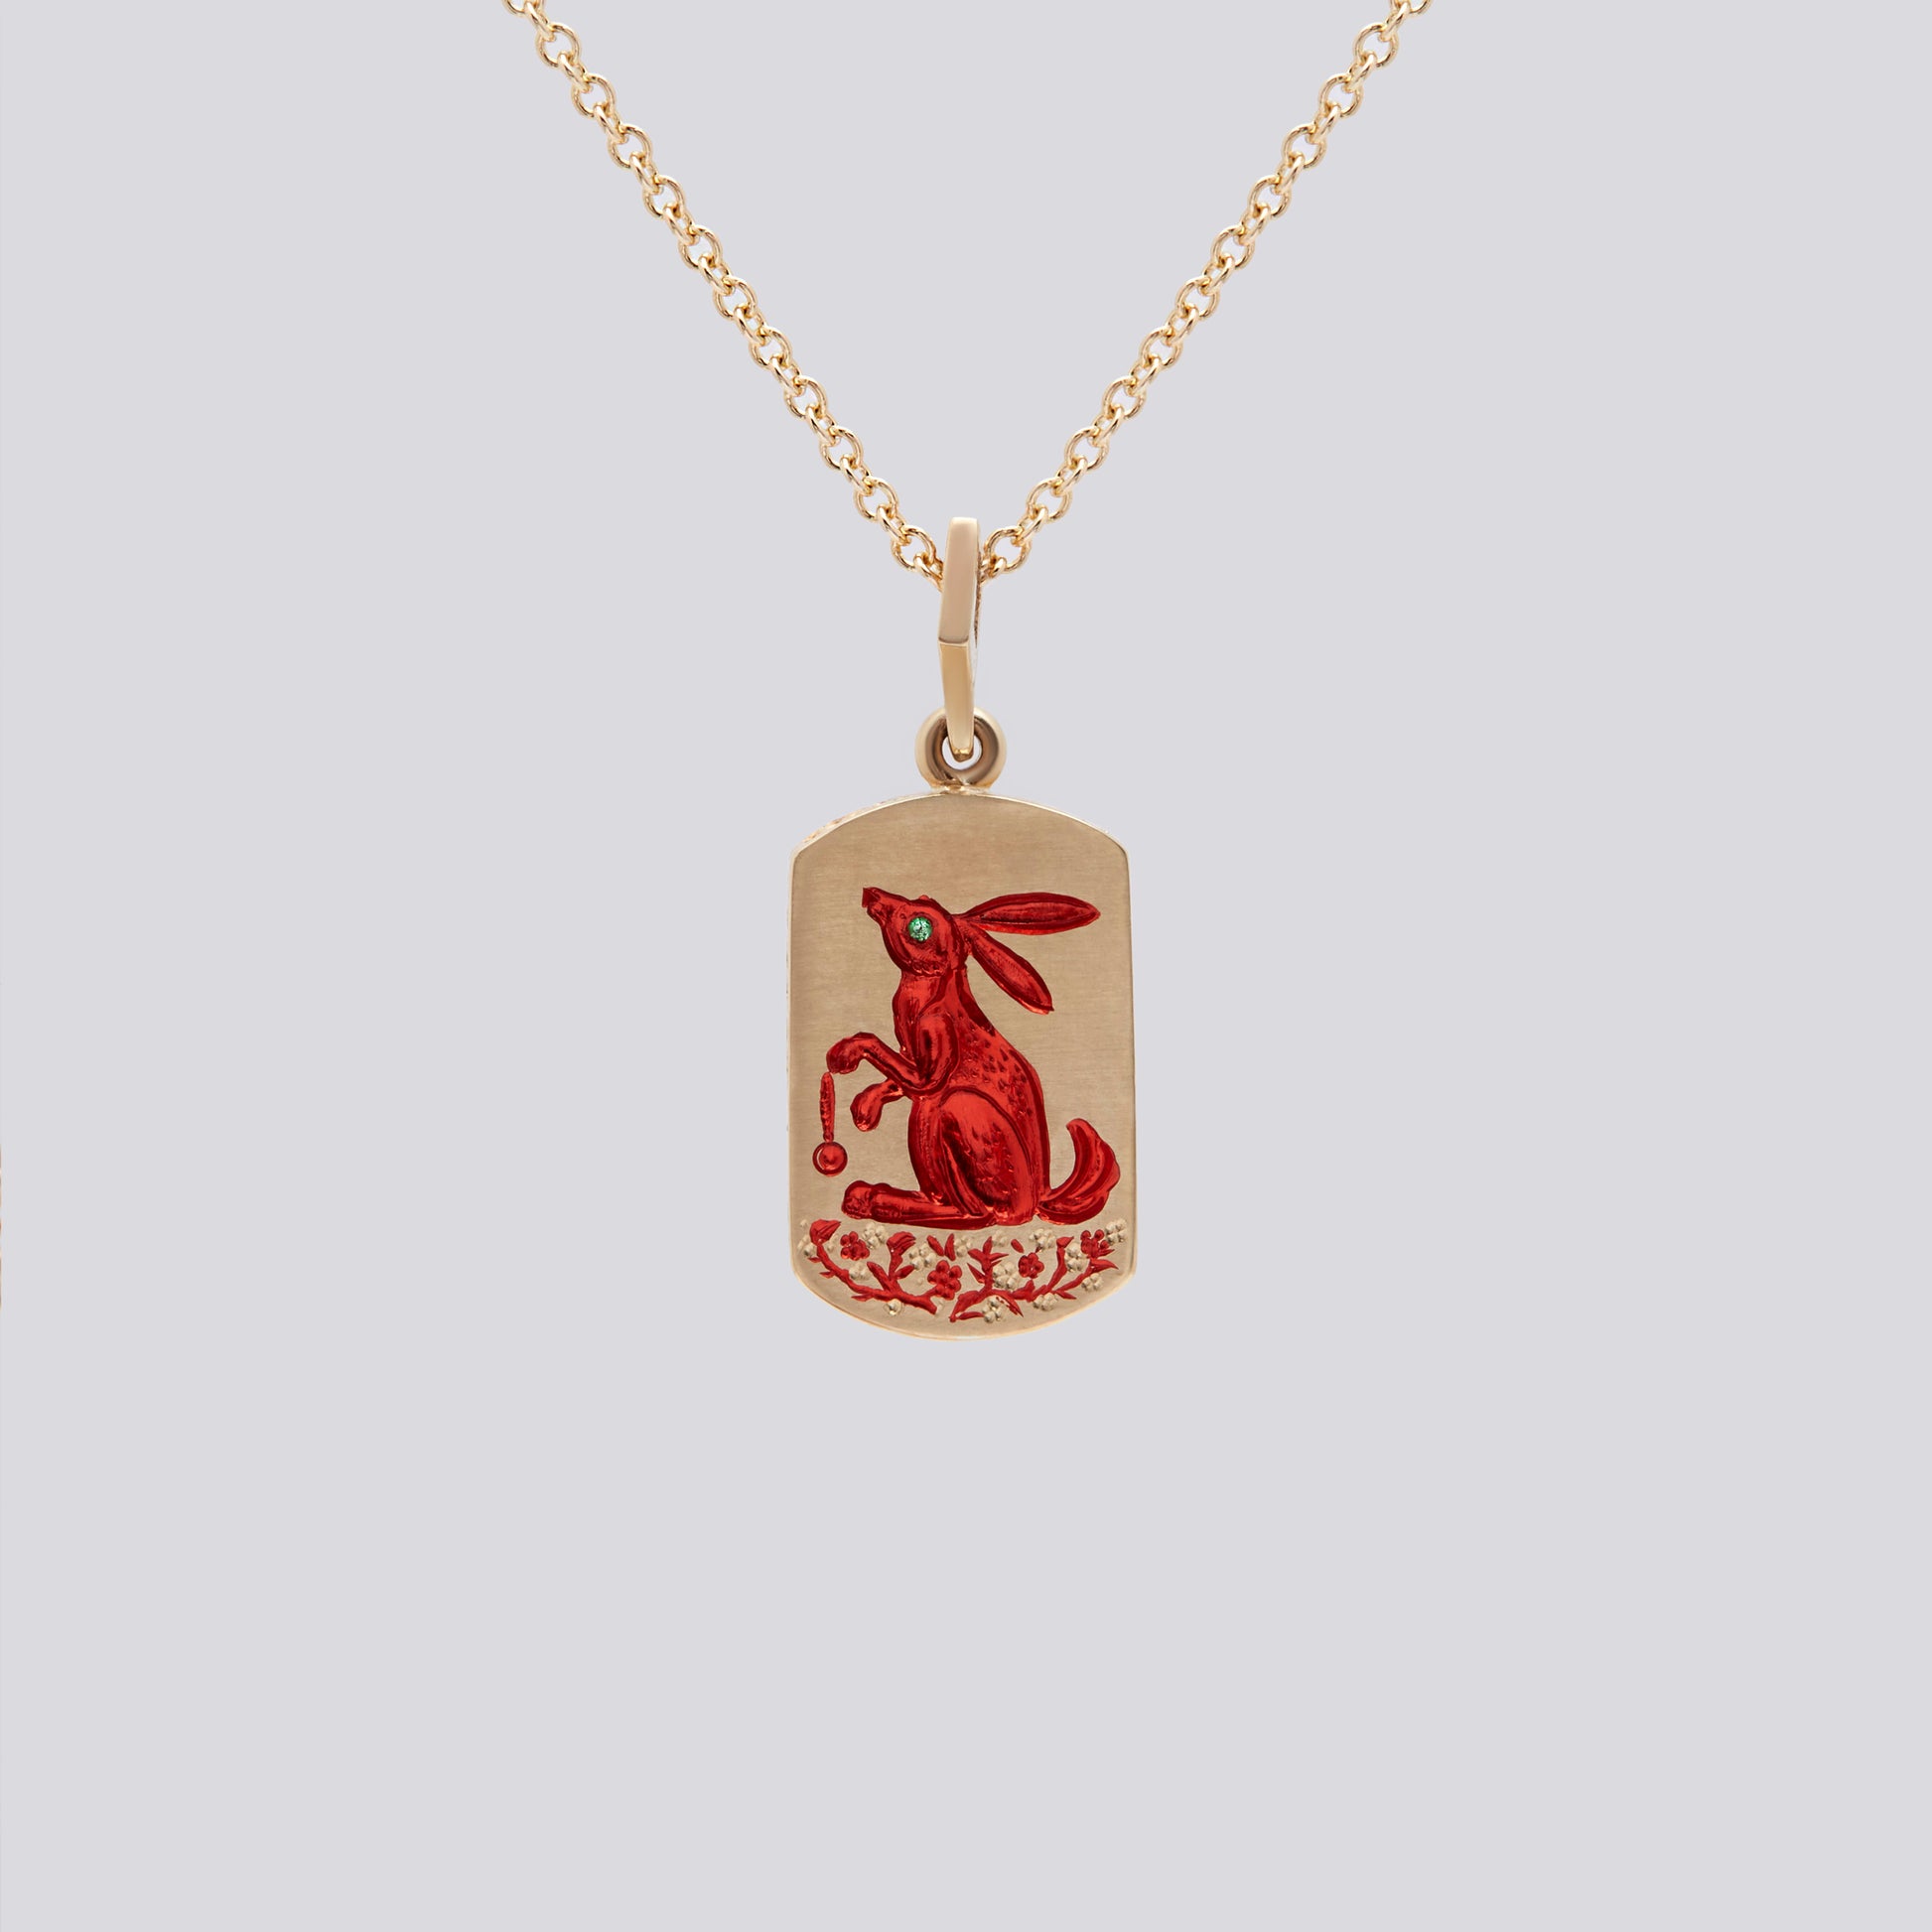 Castro Smith Jewelry Gold Rabbit Pendant Necklace with Red Engravings.